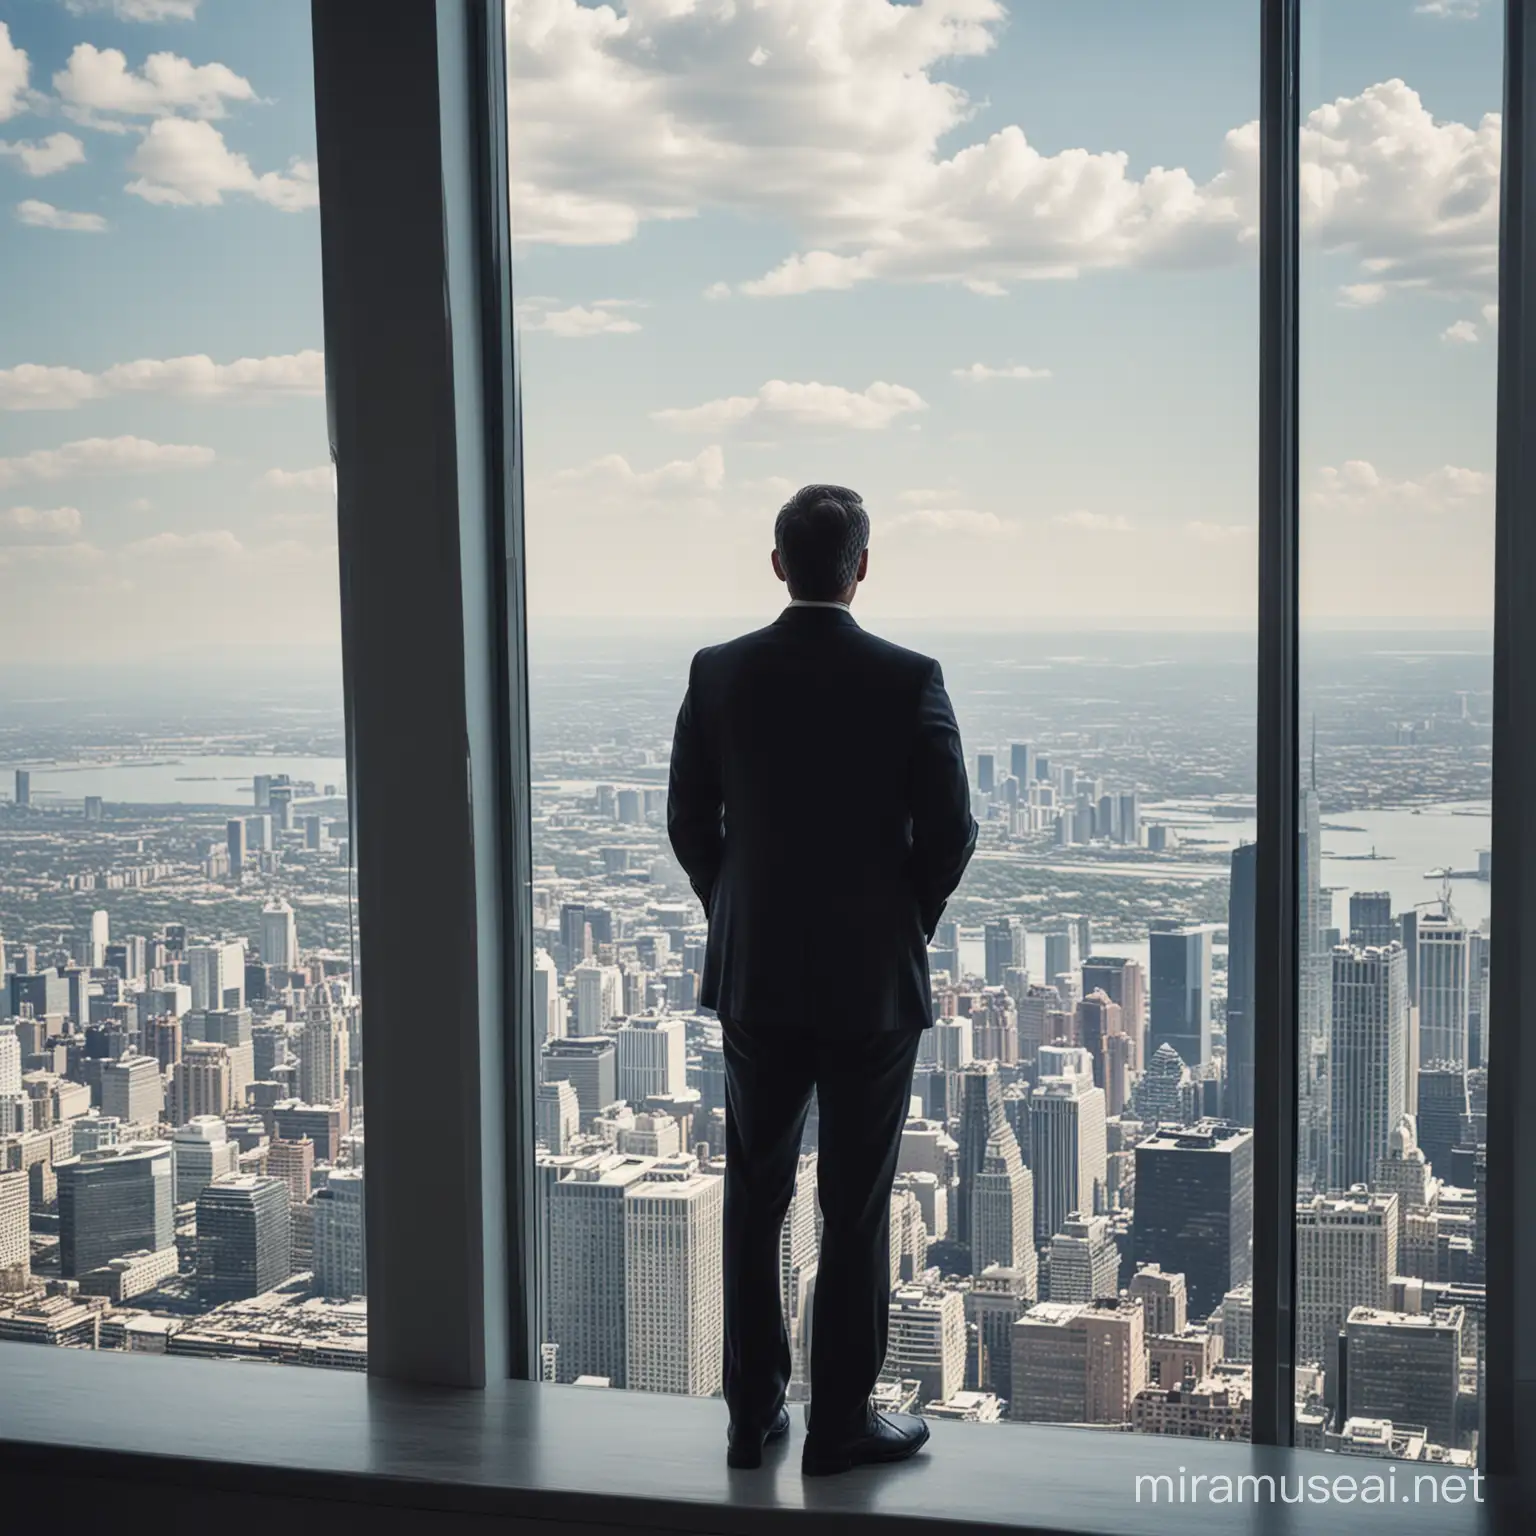 CEO Gazing Over Cityscape from HighRise Office